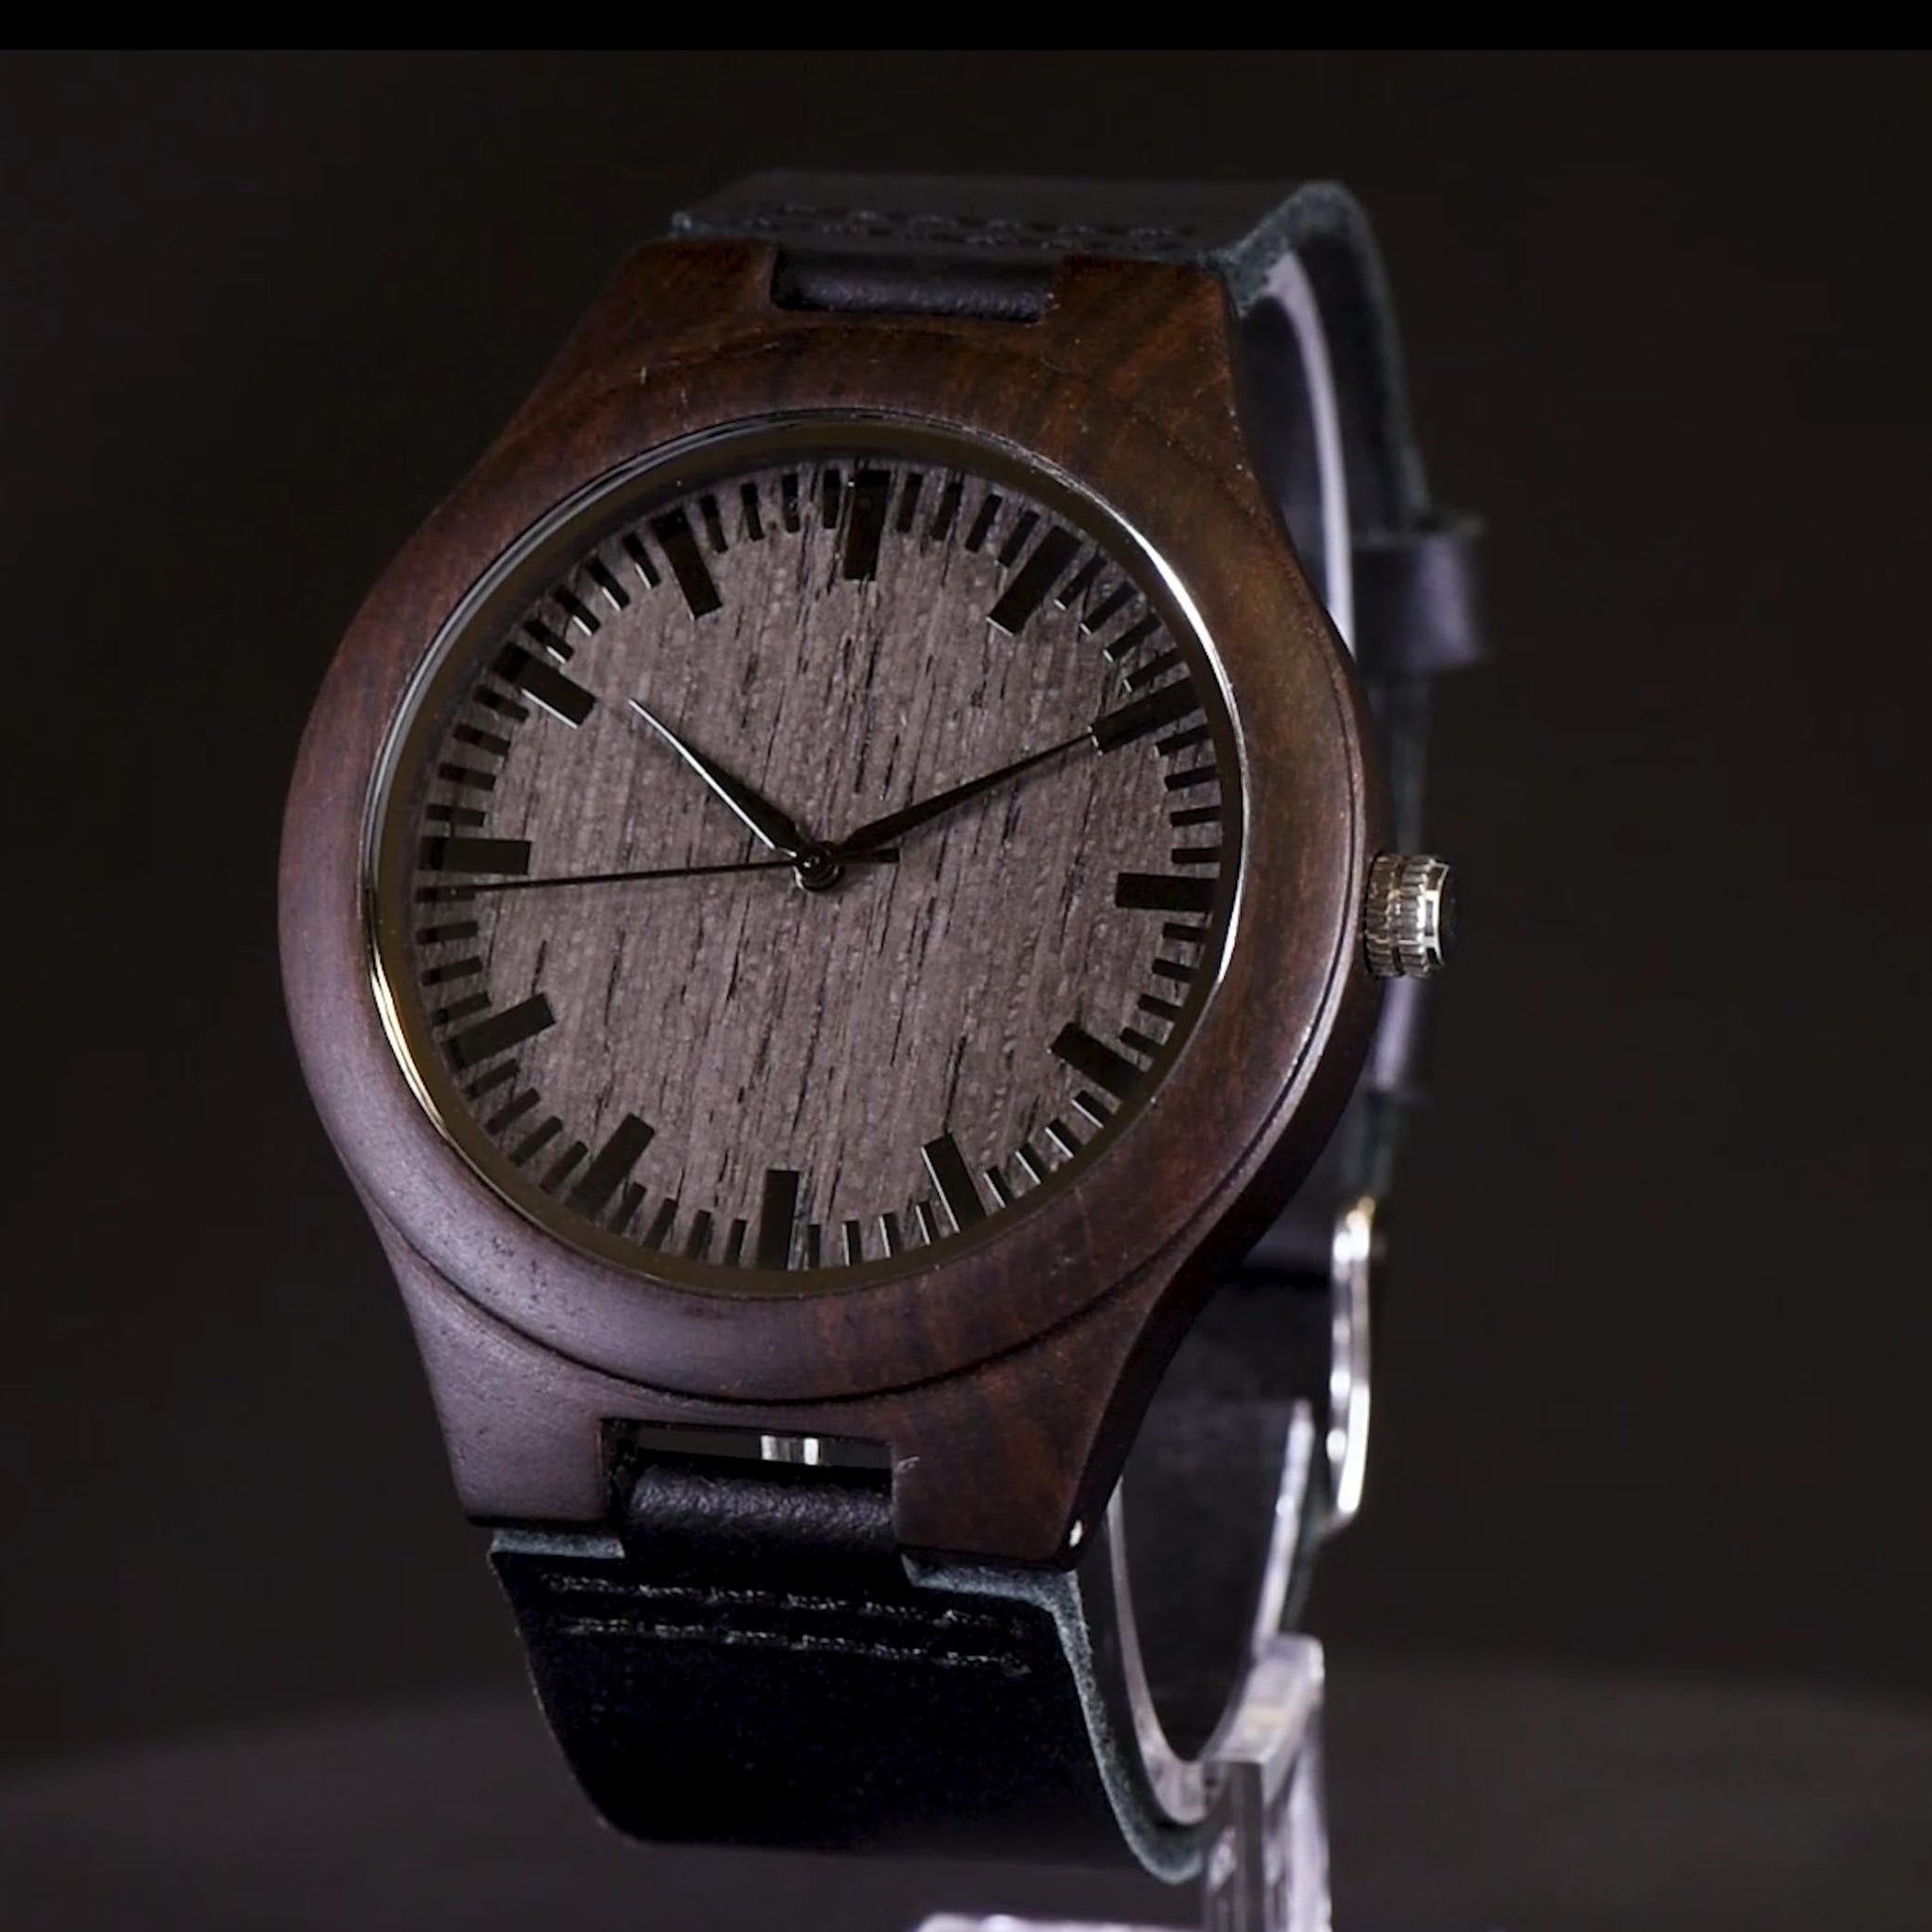 ShineOn Fulfillment Watches To My Son - Stand tall even if you fall - Wooden Watch